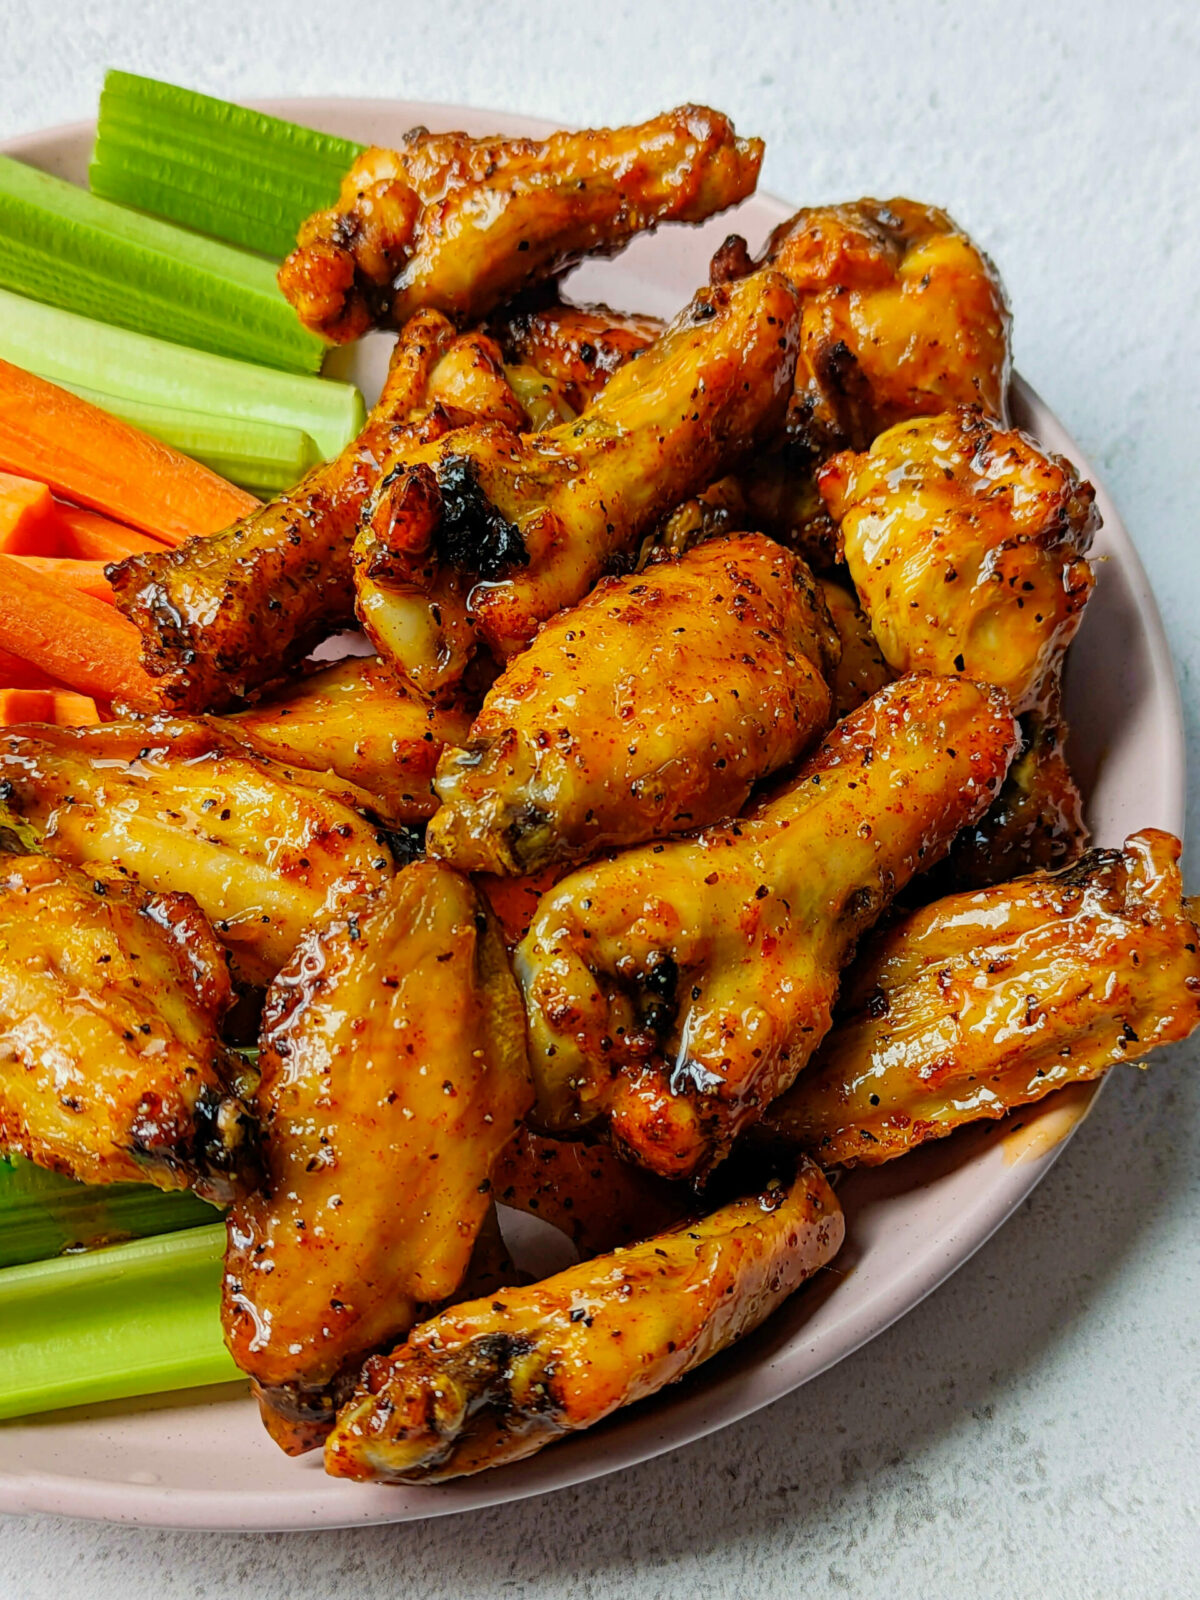 A close up of hot honey lemon pepper wings on a plate with vegetables.